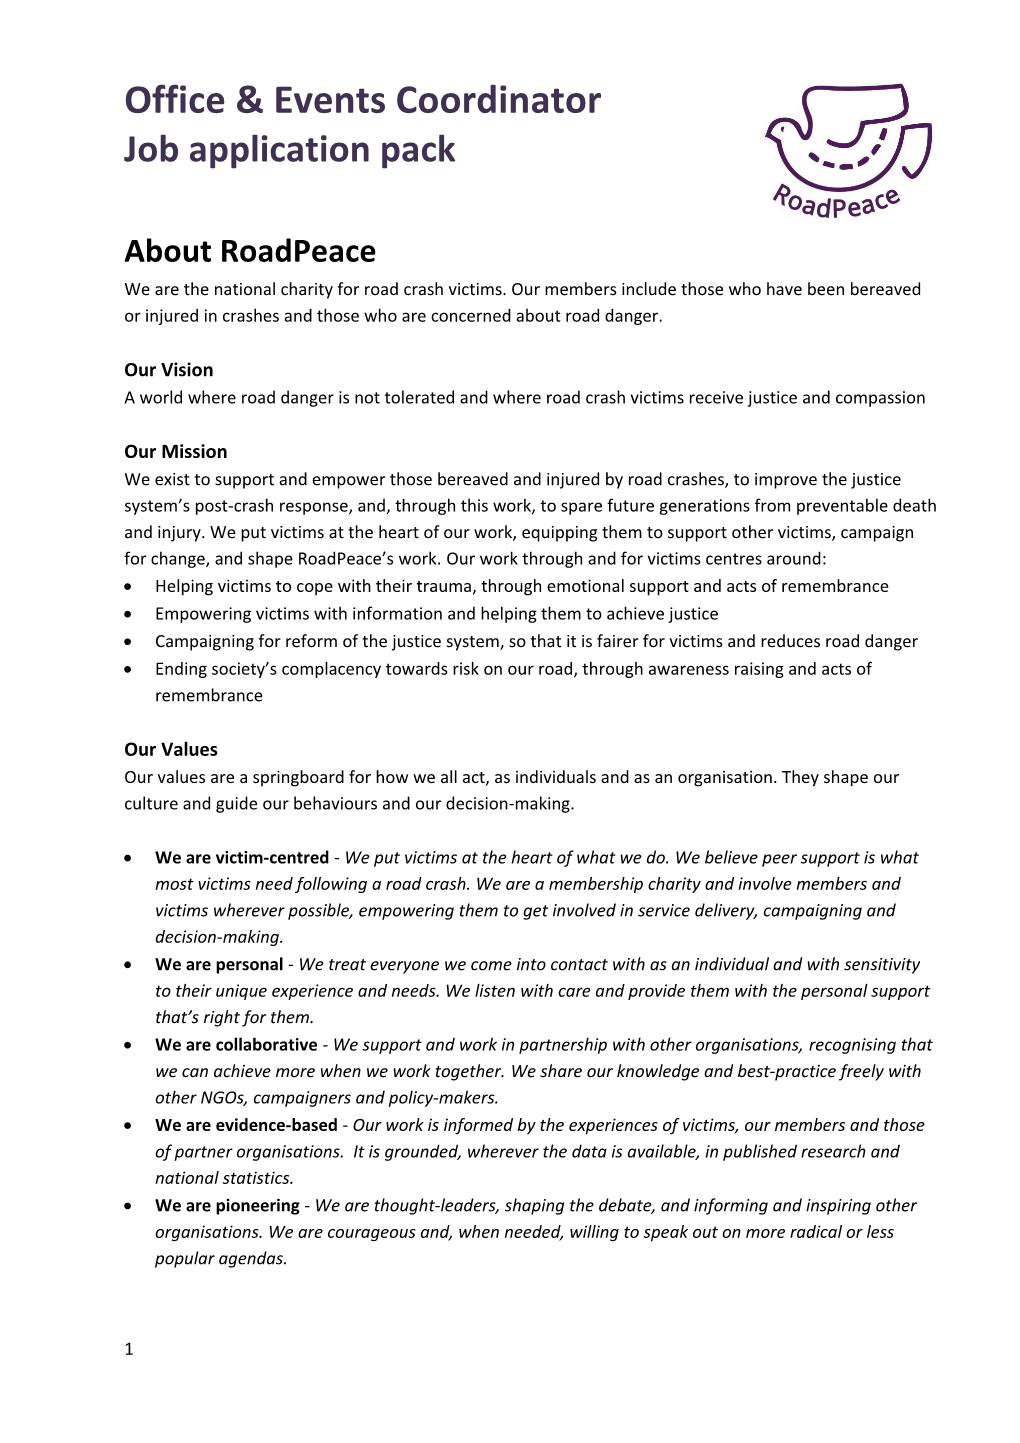 About Roadpeace